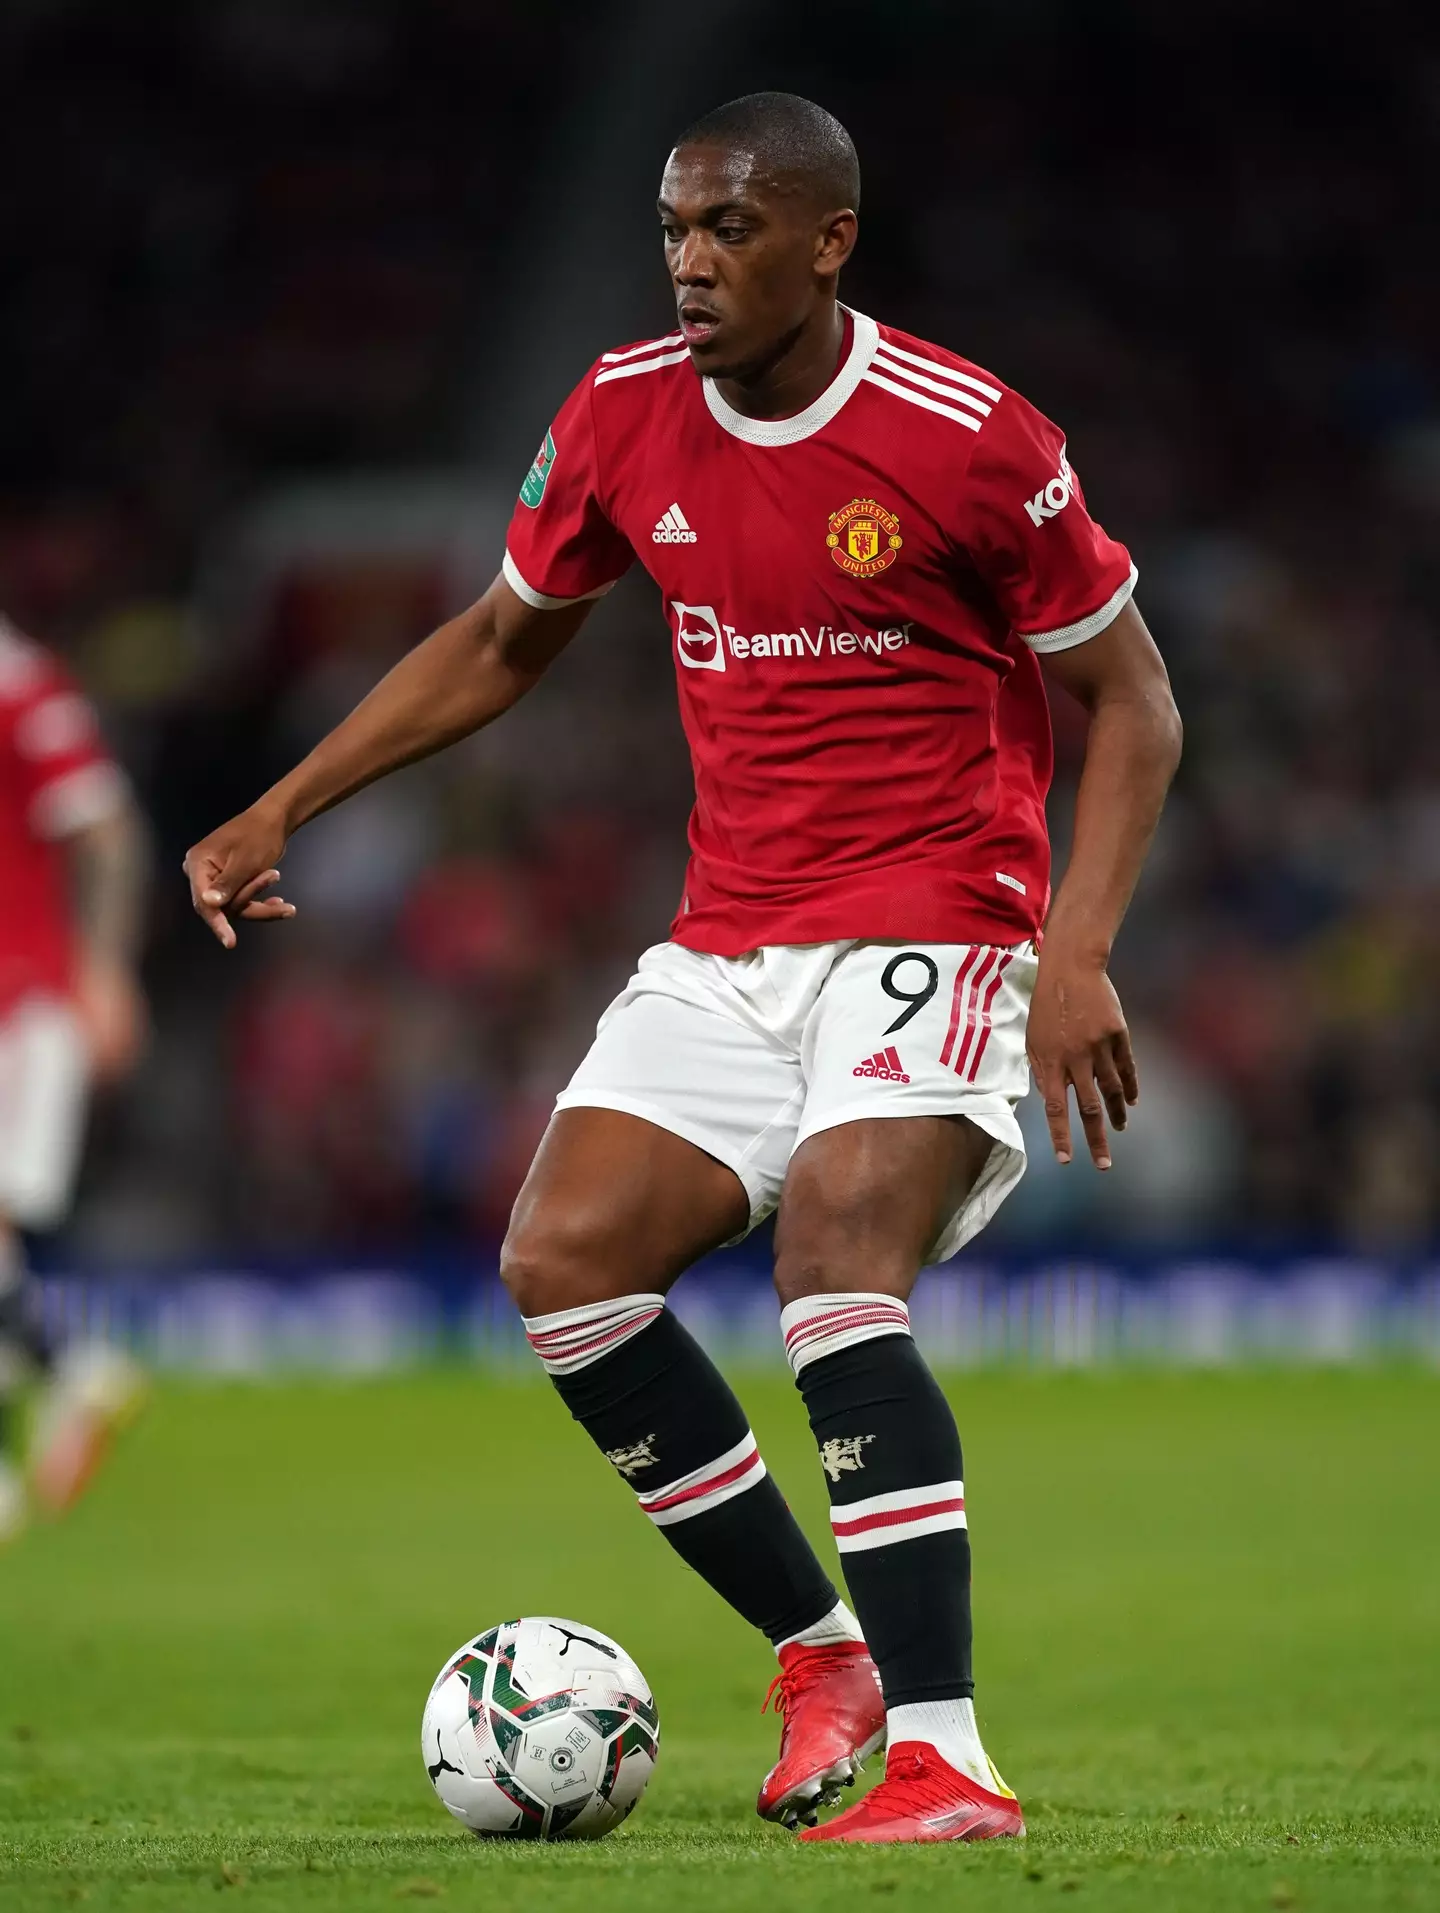 Anthony Martial has dropped off for United in recent seasons. (Alamy)